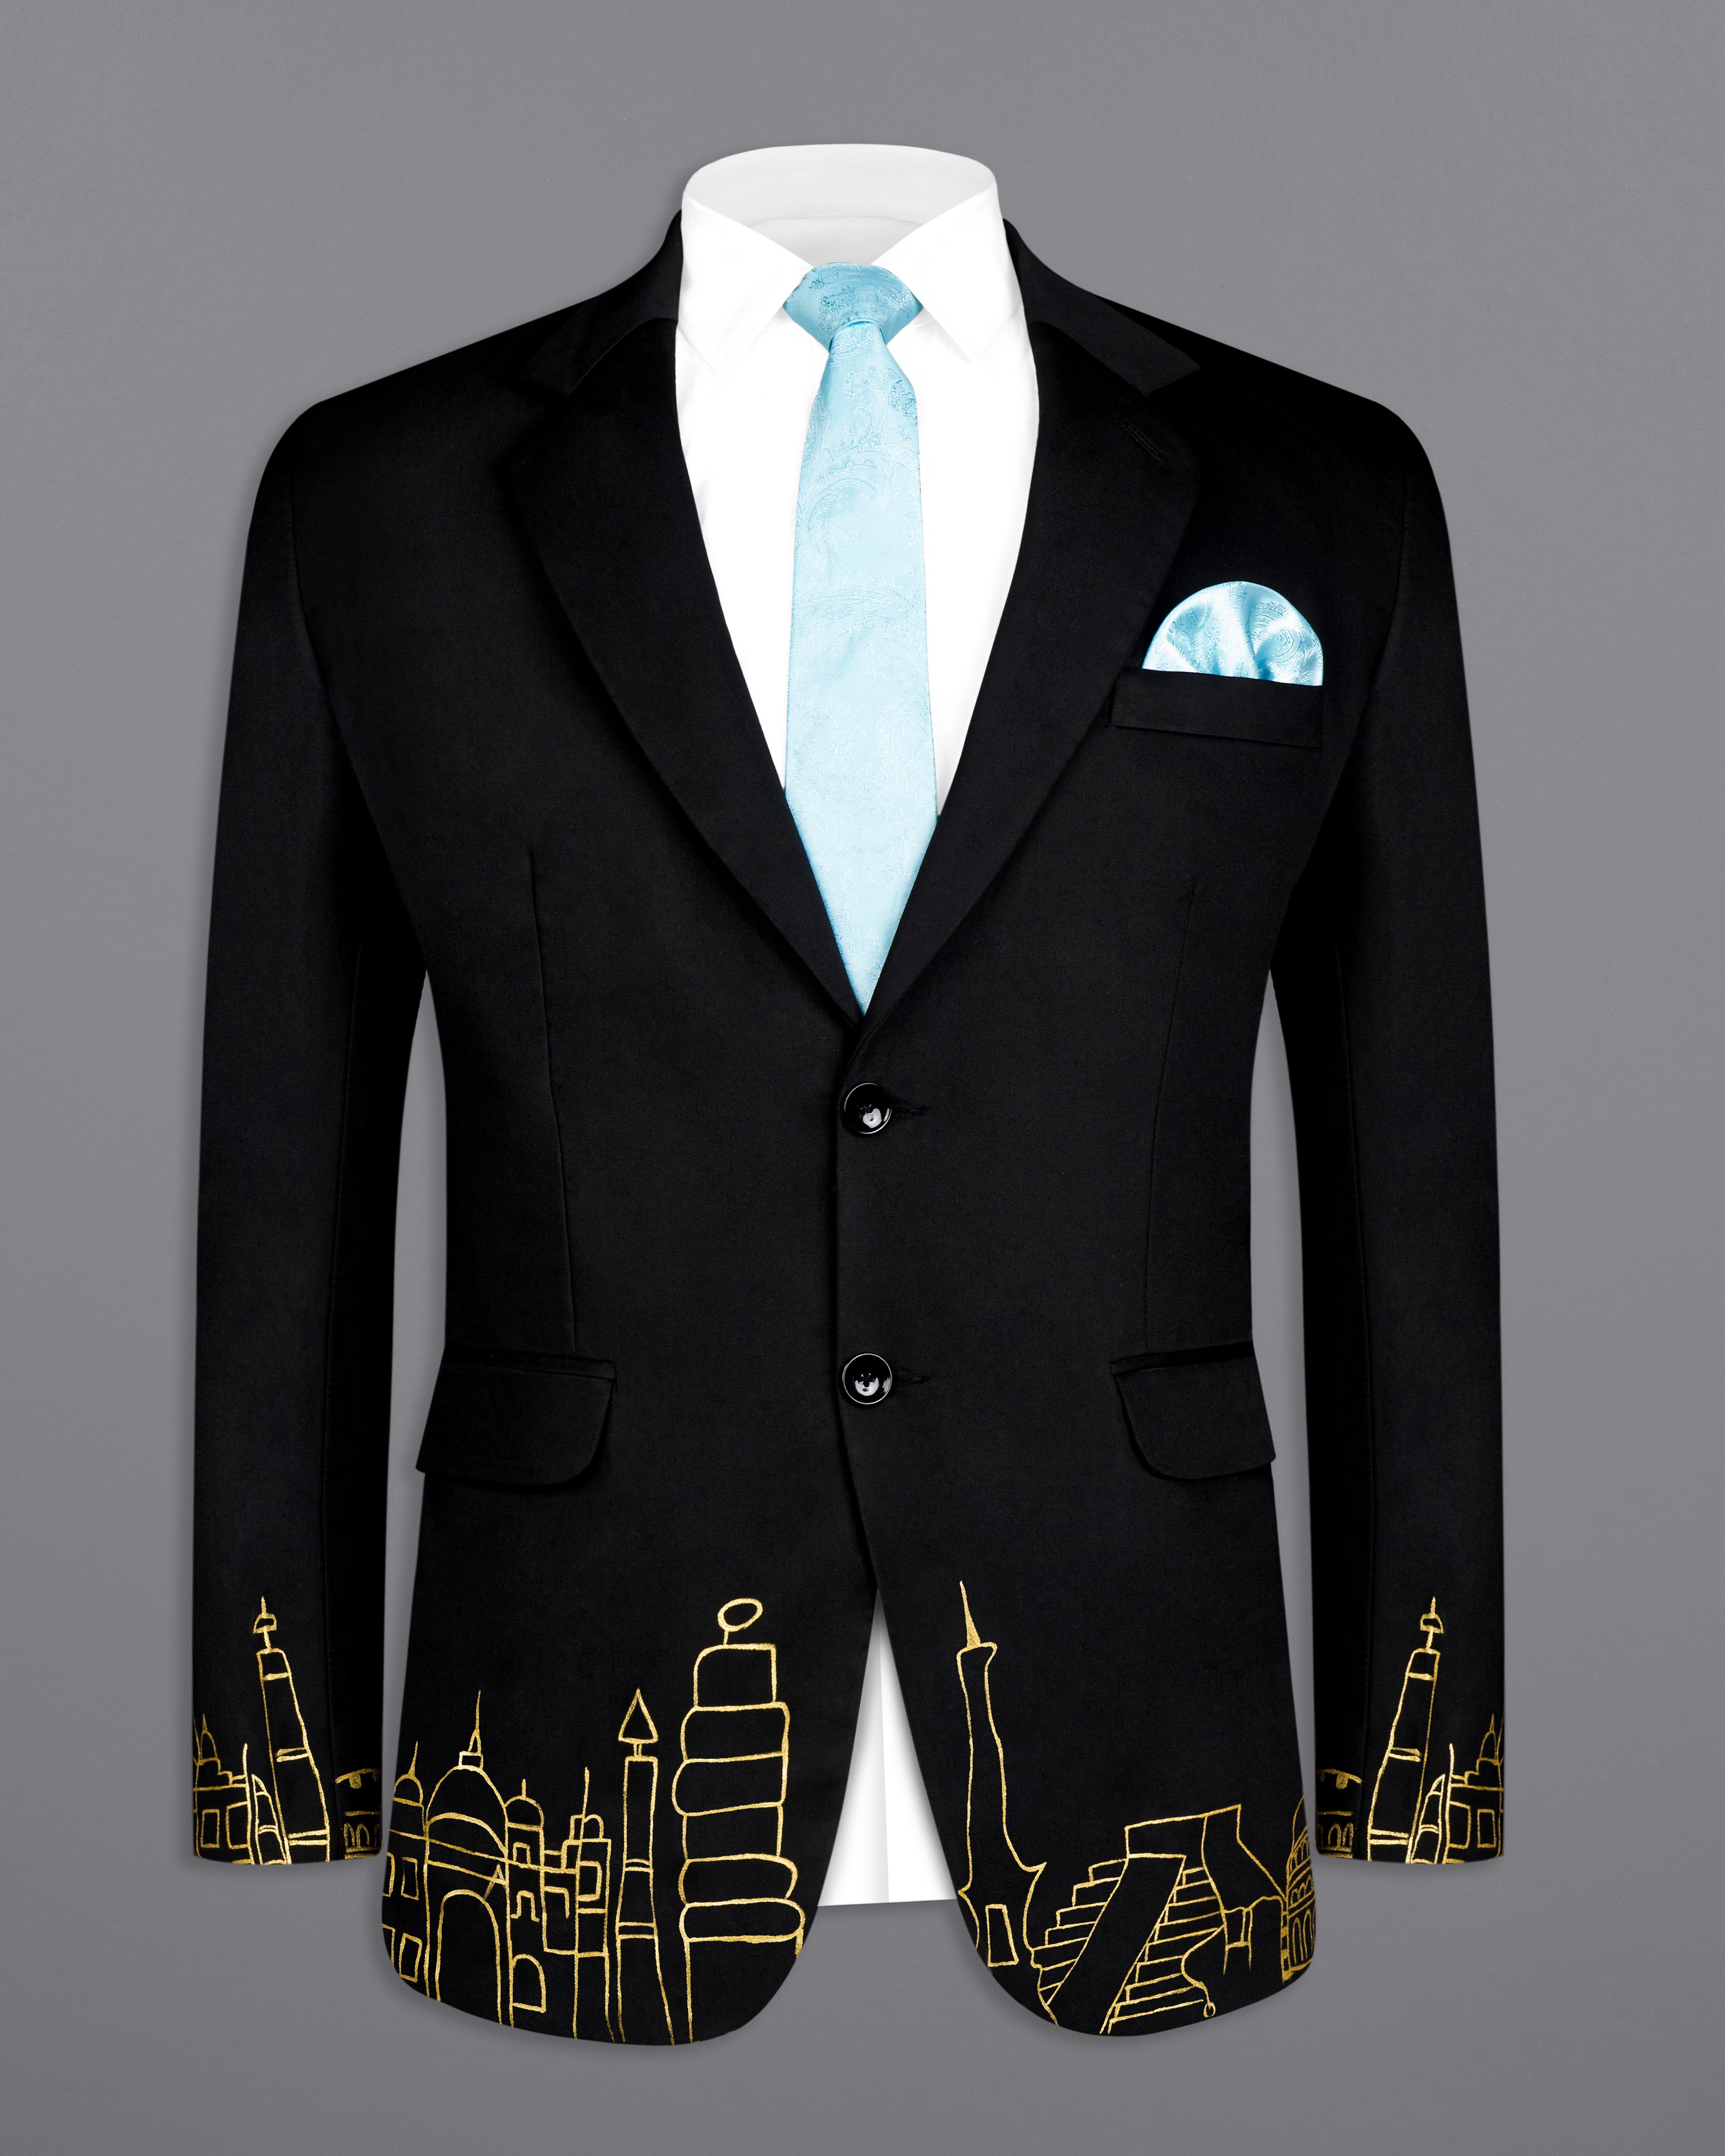 Jade Black With Hand Painted Single Breasted Designer Suit ST2619-SB-ART-36, ST2619-SB-ART-38, ST2619-SB-ART-40, ST2619-SB-ART-42, ST2619-SB-ART-44, ST2619-SB-ART-46, ST2619-SB-ART-48, ST2619-SB-ART-50, ST2619-SB-ART-52, ST2619-SB-ART-54, ST2619-SB-ART-56, ST2619-SB-ART-58, ST2619-SB-ART-60